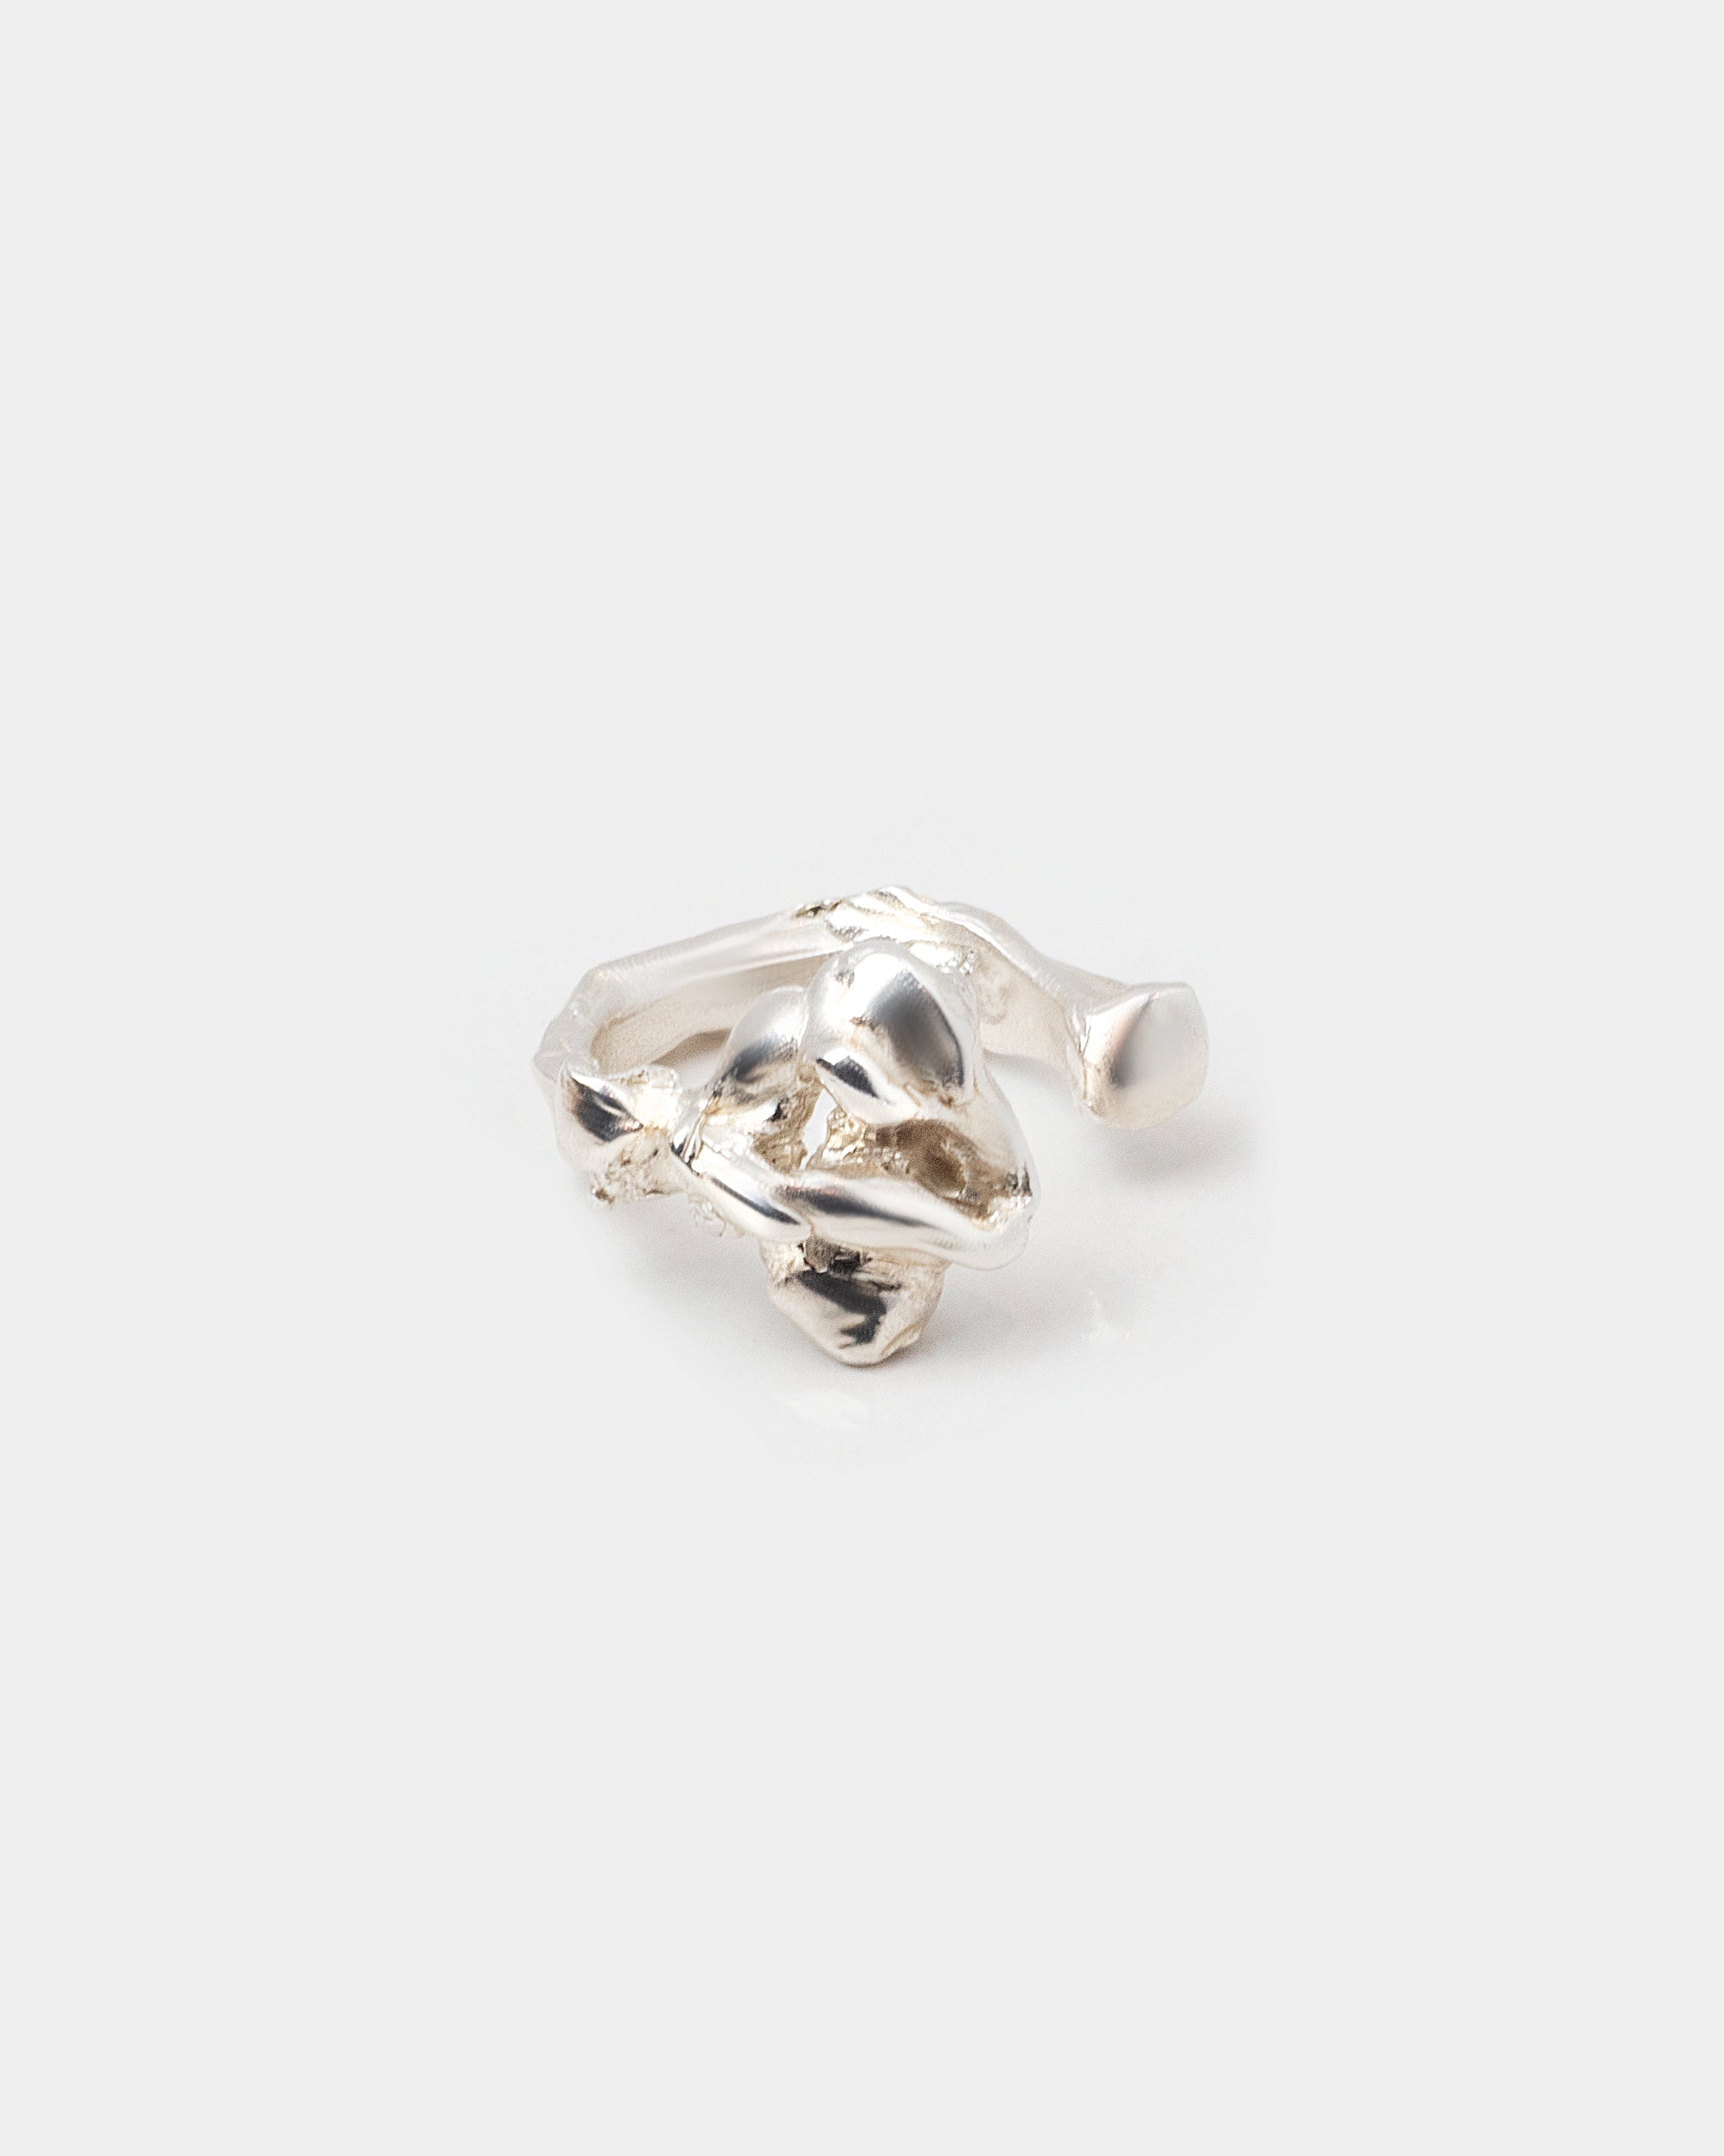 Fluid Rose Ring | Recycled Sterling Silver